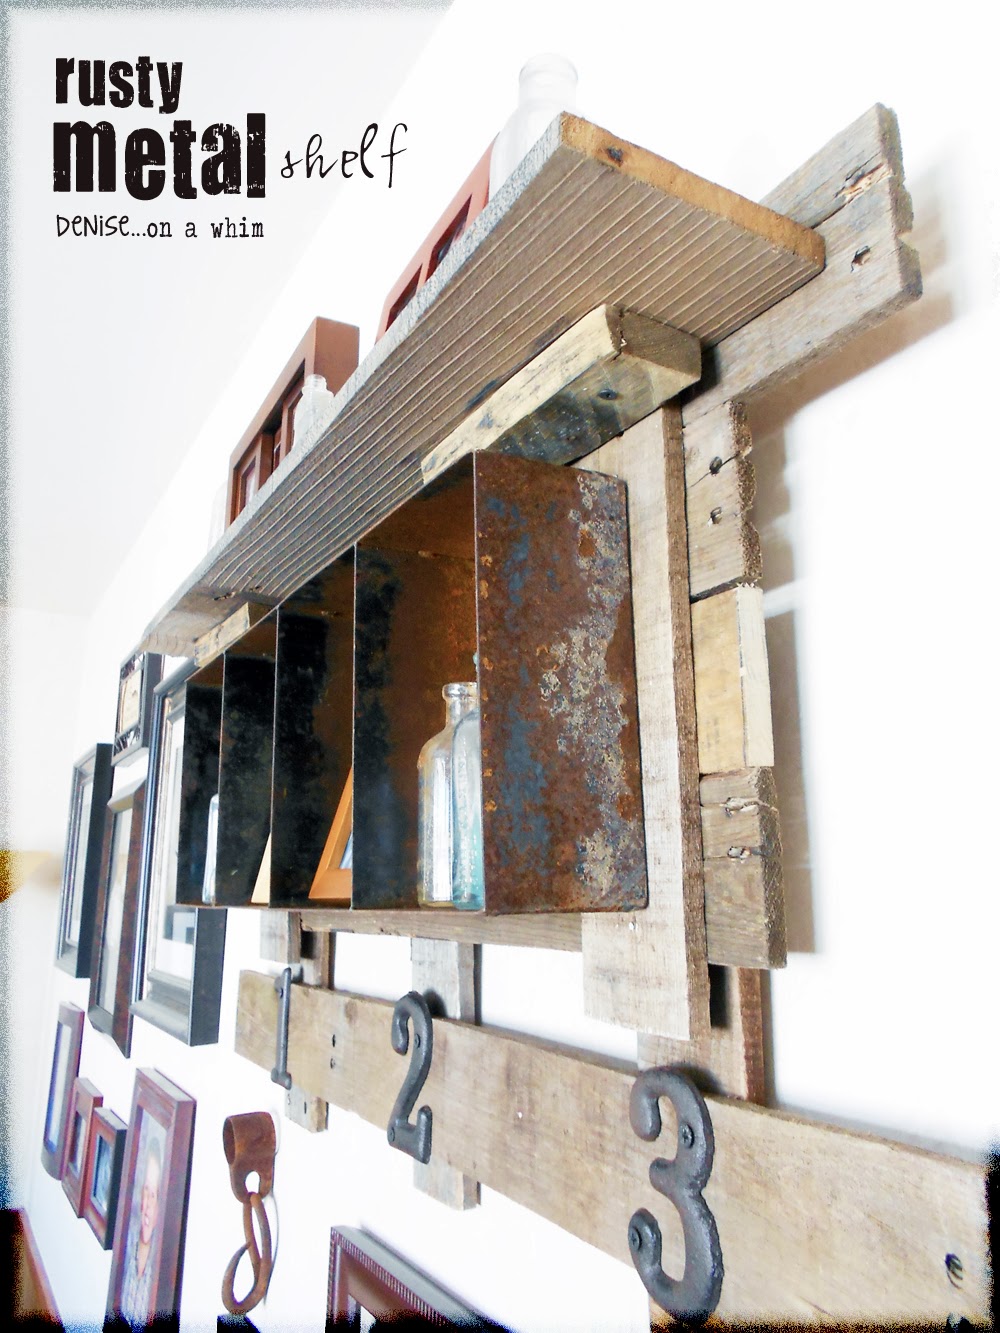 Rustic pallet wood is the perfect backdrop for a rusty bin shelf via http://deniseonawhim.blogspot.com